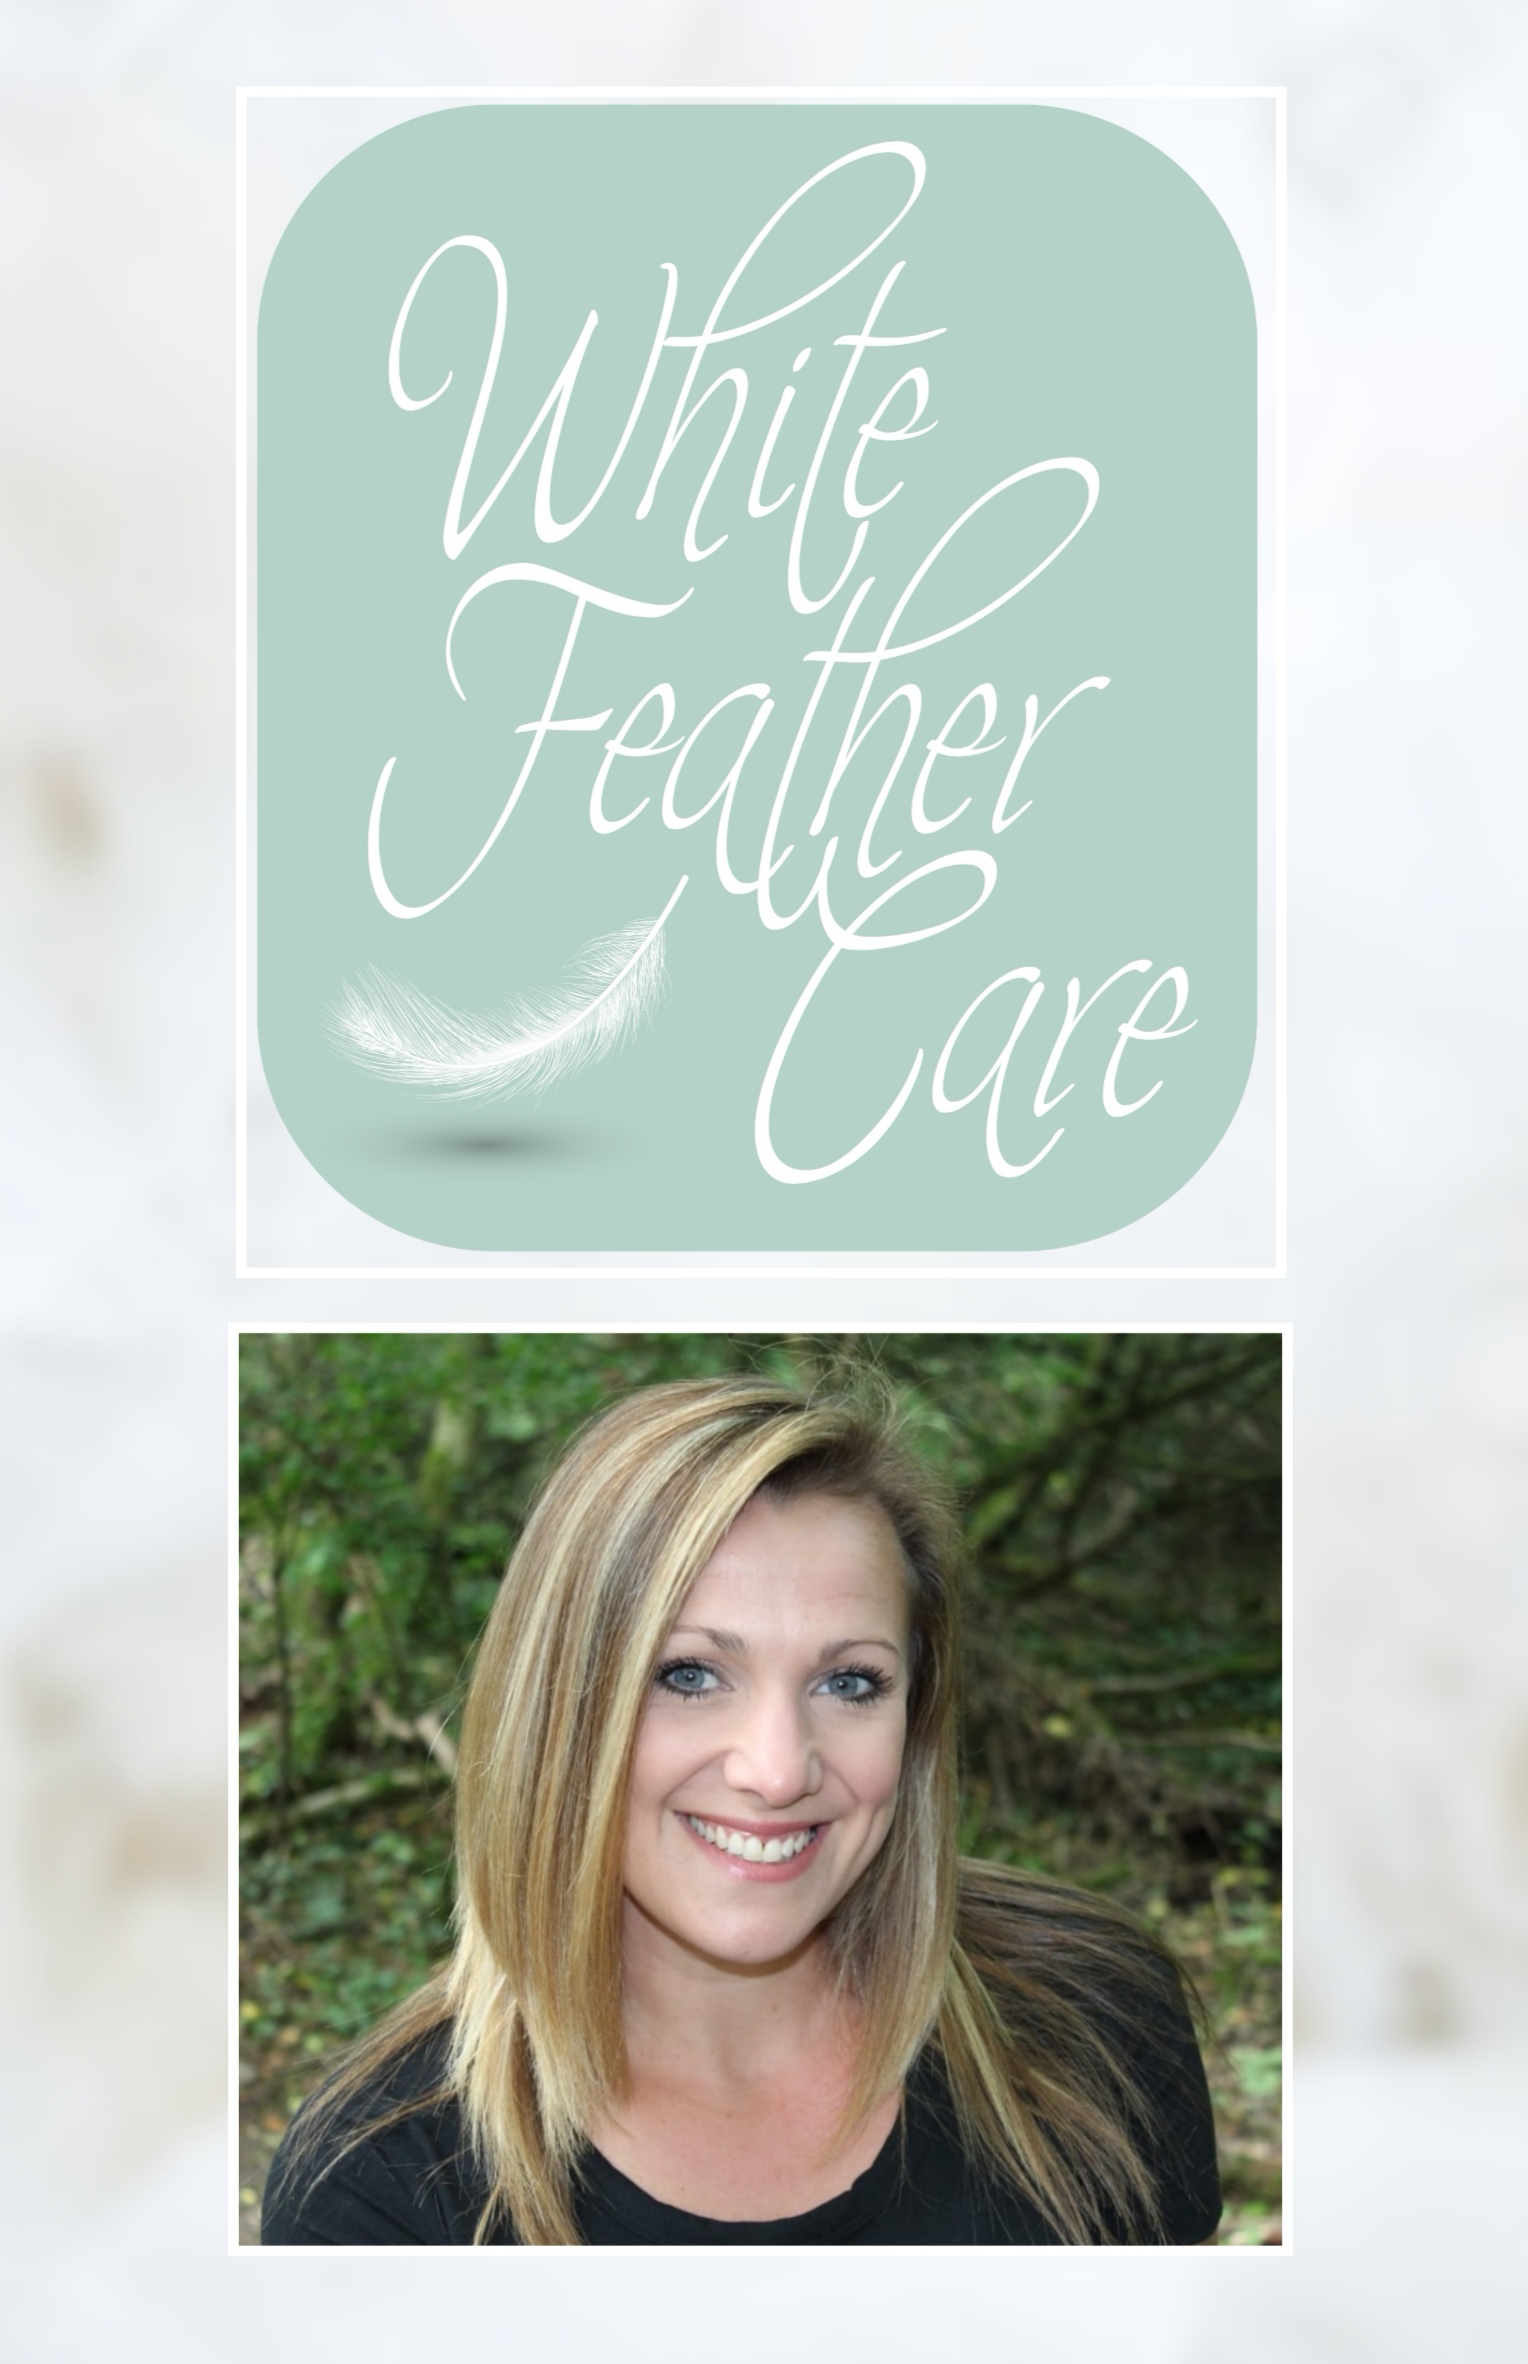 logo for White Feather Care